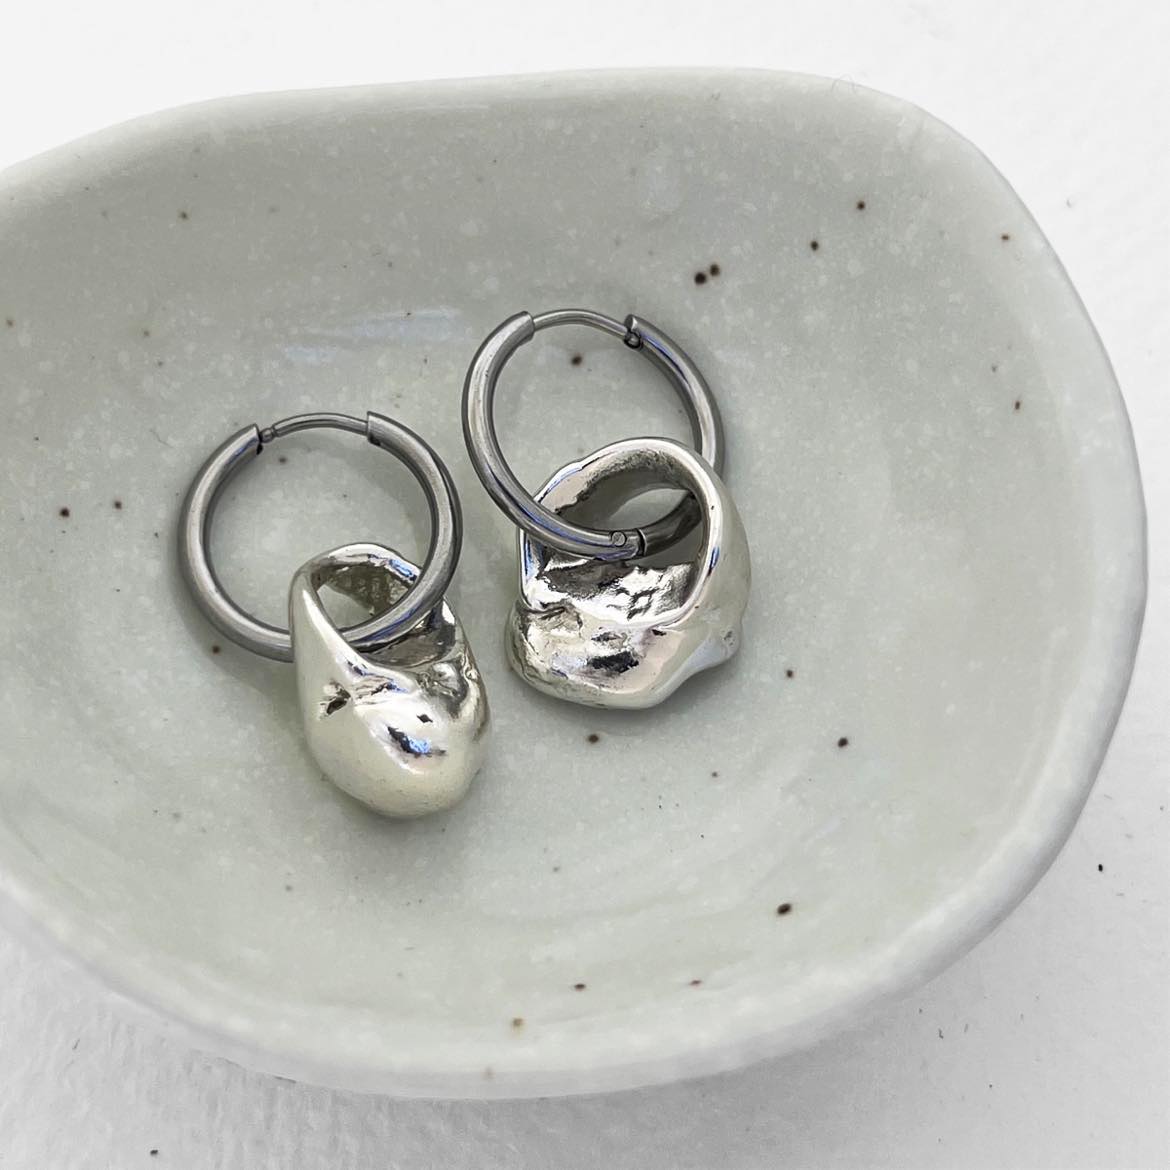 VIP ONLY - Worn out Sea Snail Shell (Pupu Nerida) Hoop Earrings